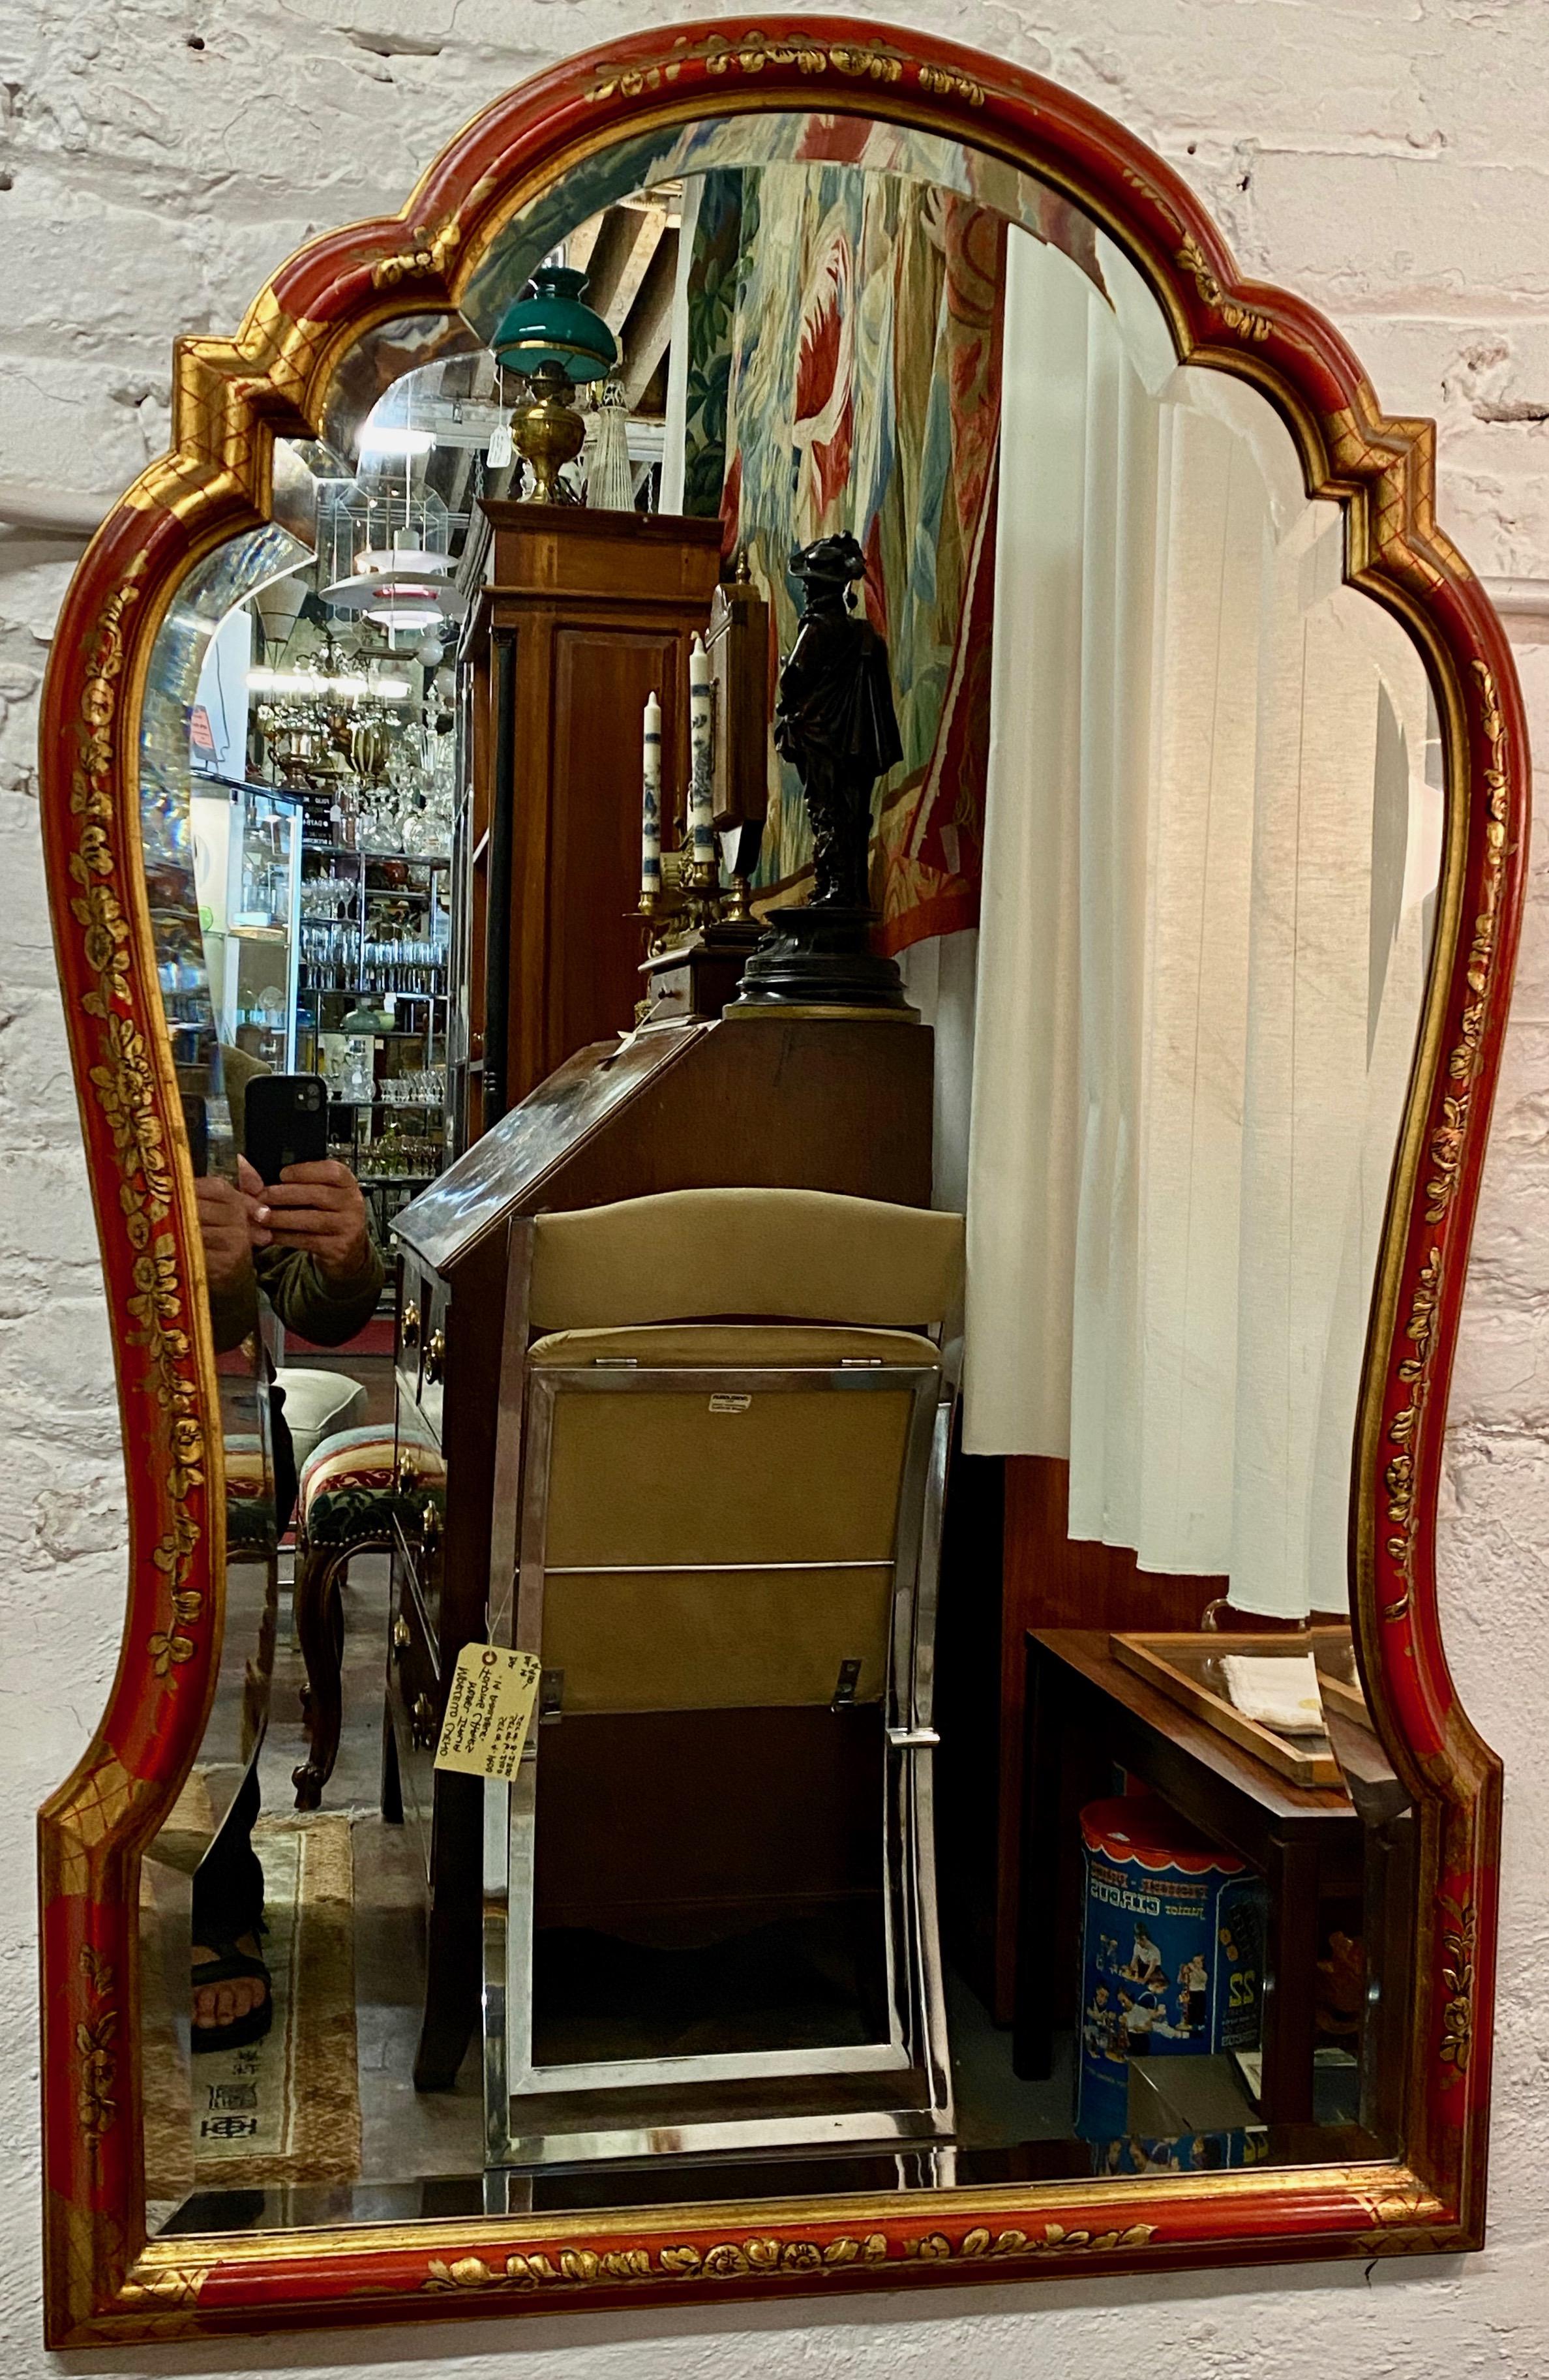 Red lacquer and chinoiserie framed bevel edge mirror by Baker, circa 1970s

Frame dimensions: 25.5